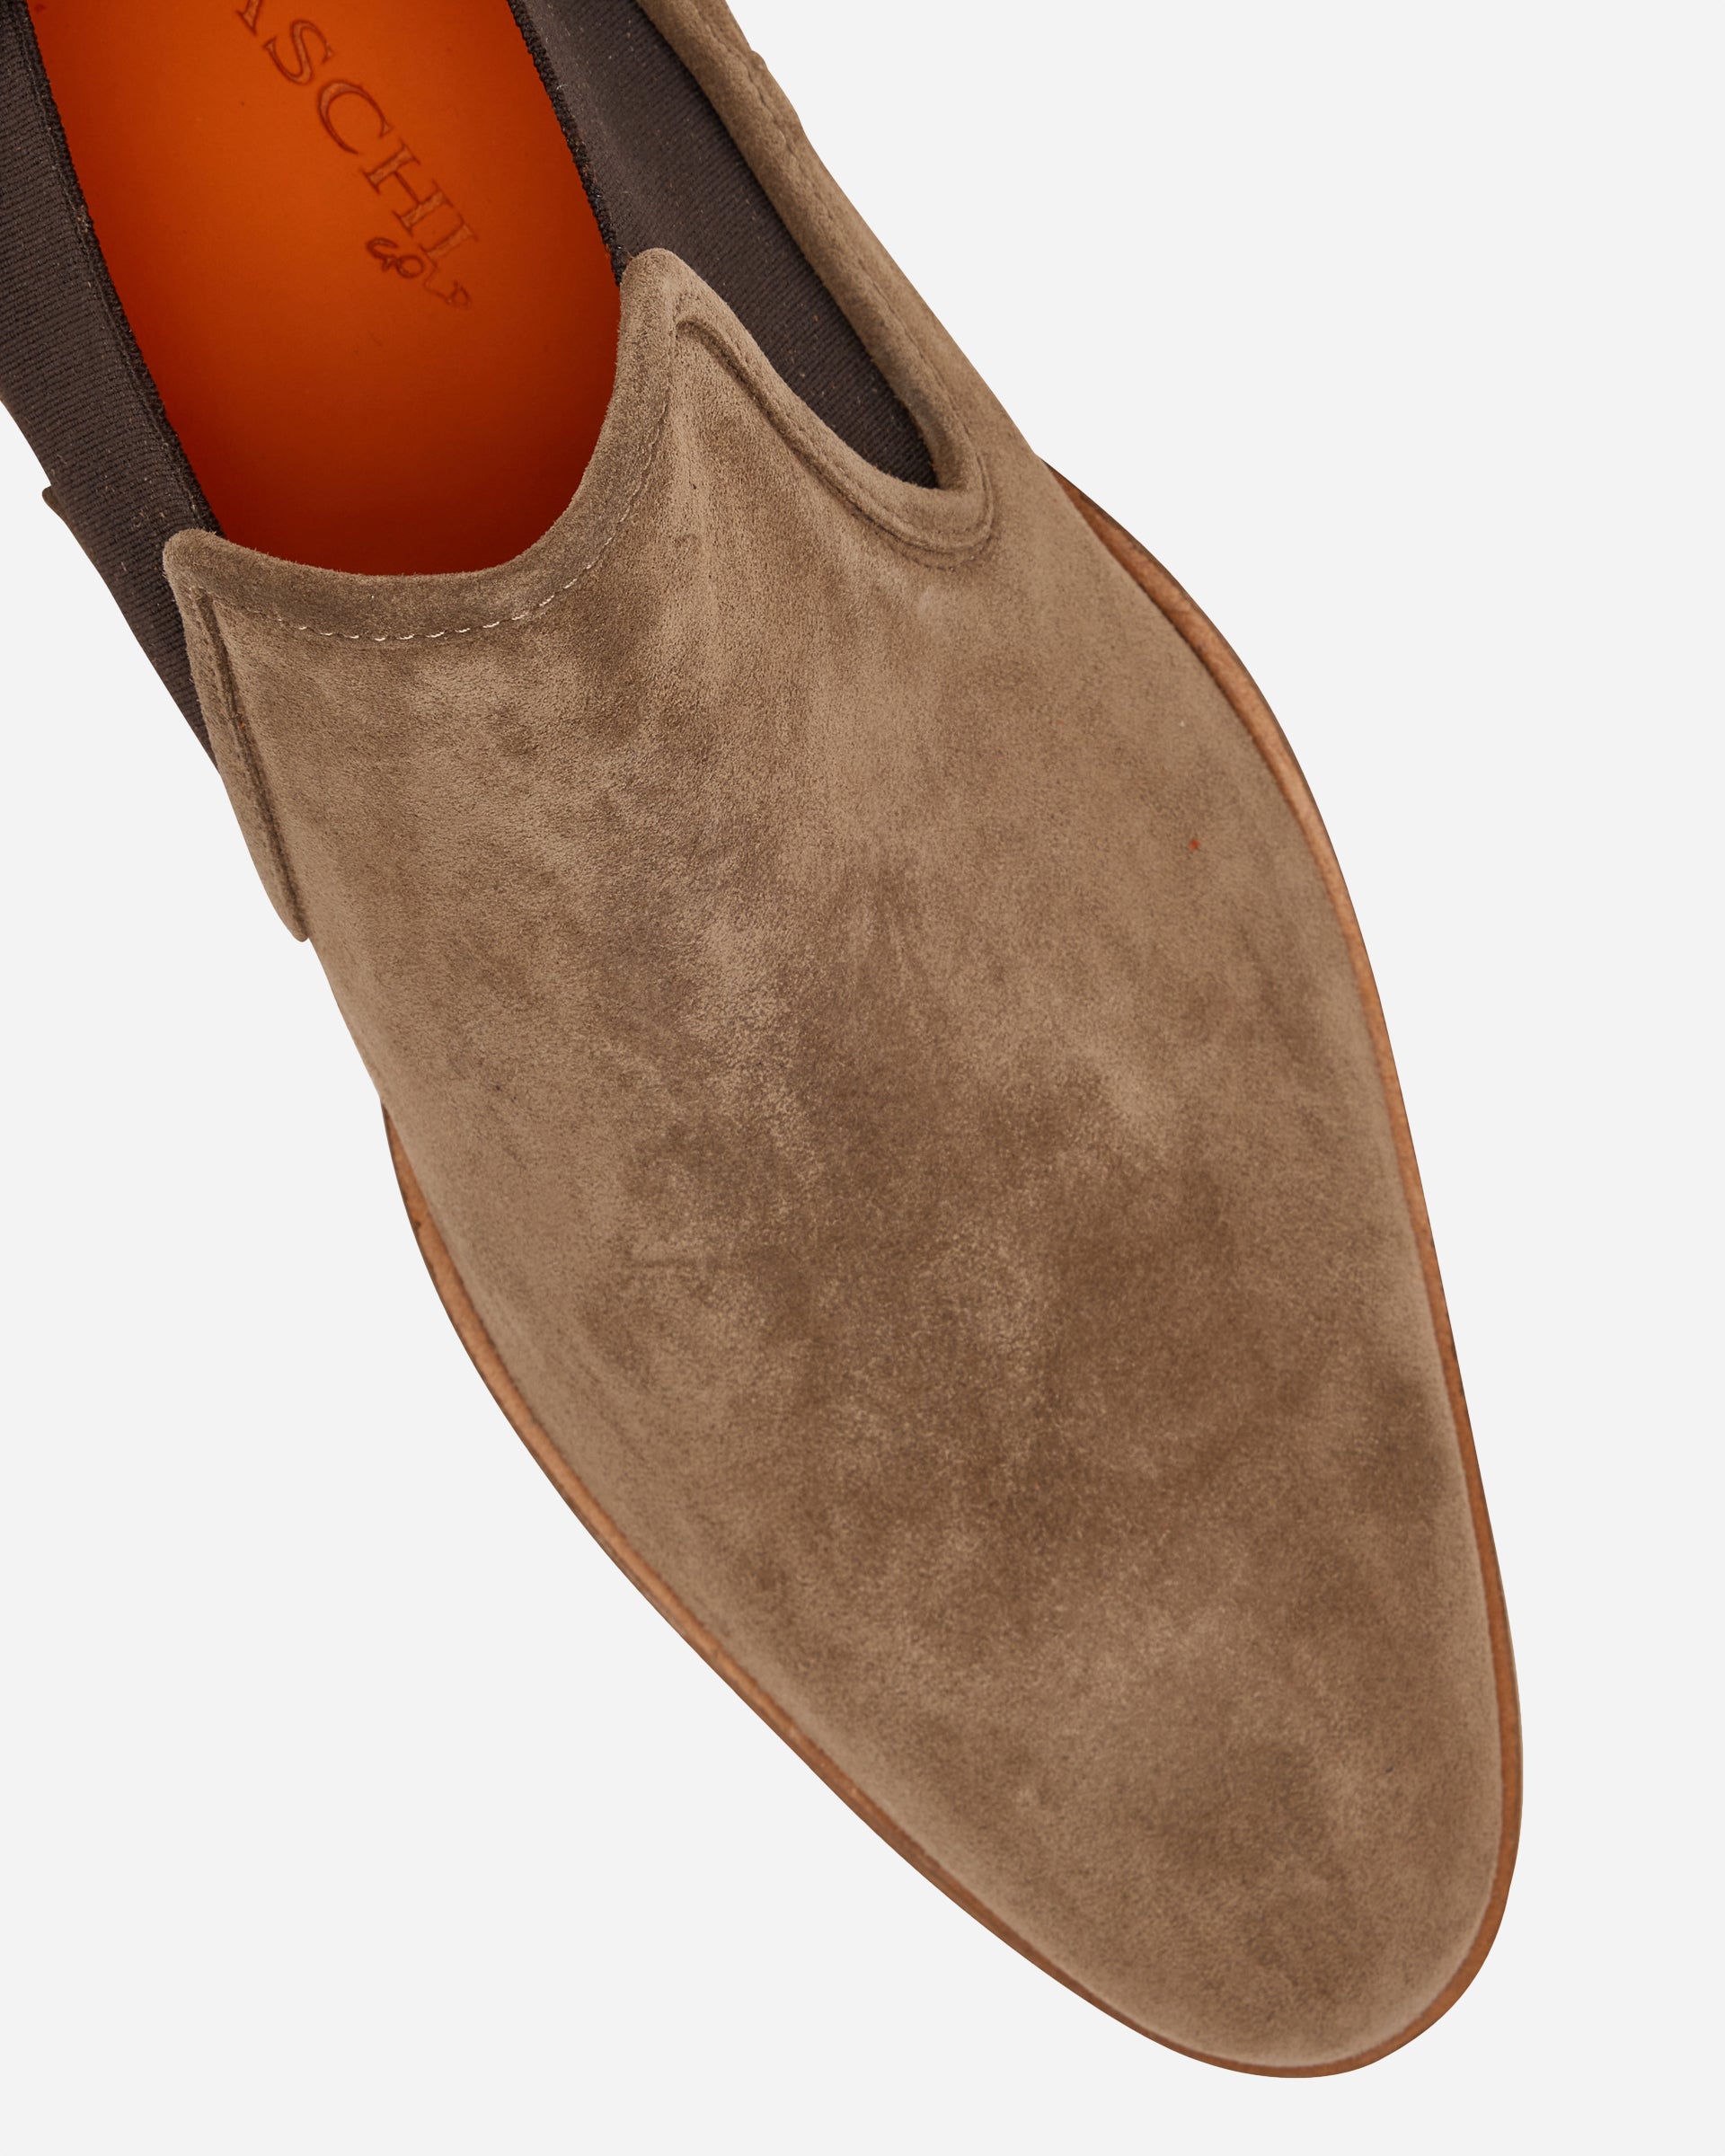 I Maschi Grey Suede Chelsea Boot - Men's Shoes at Menzclub